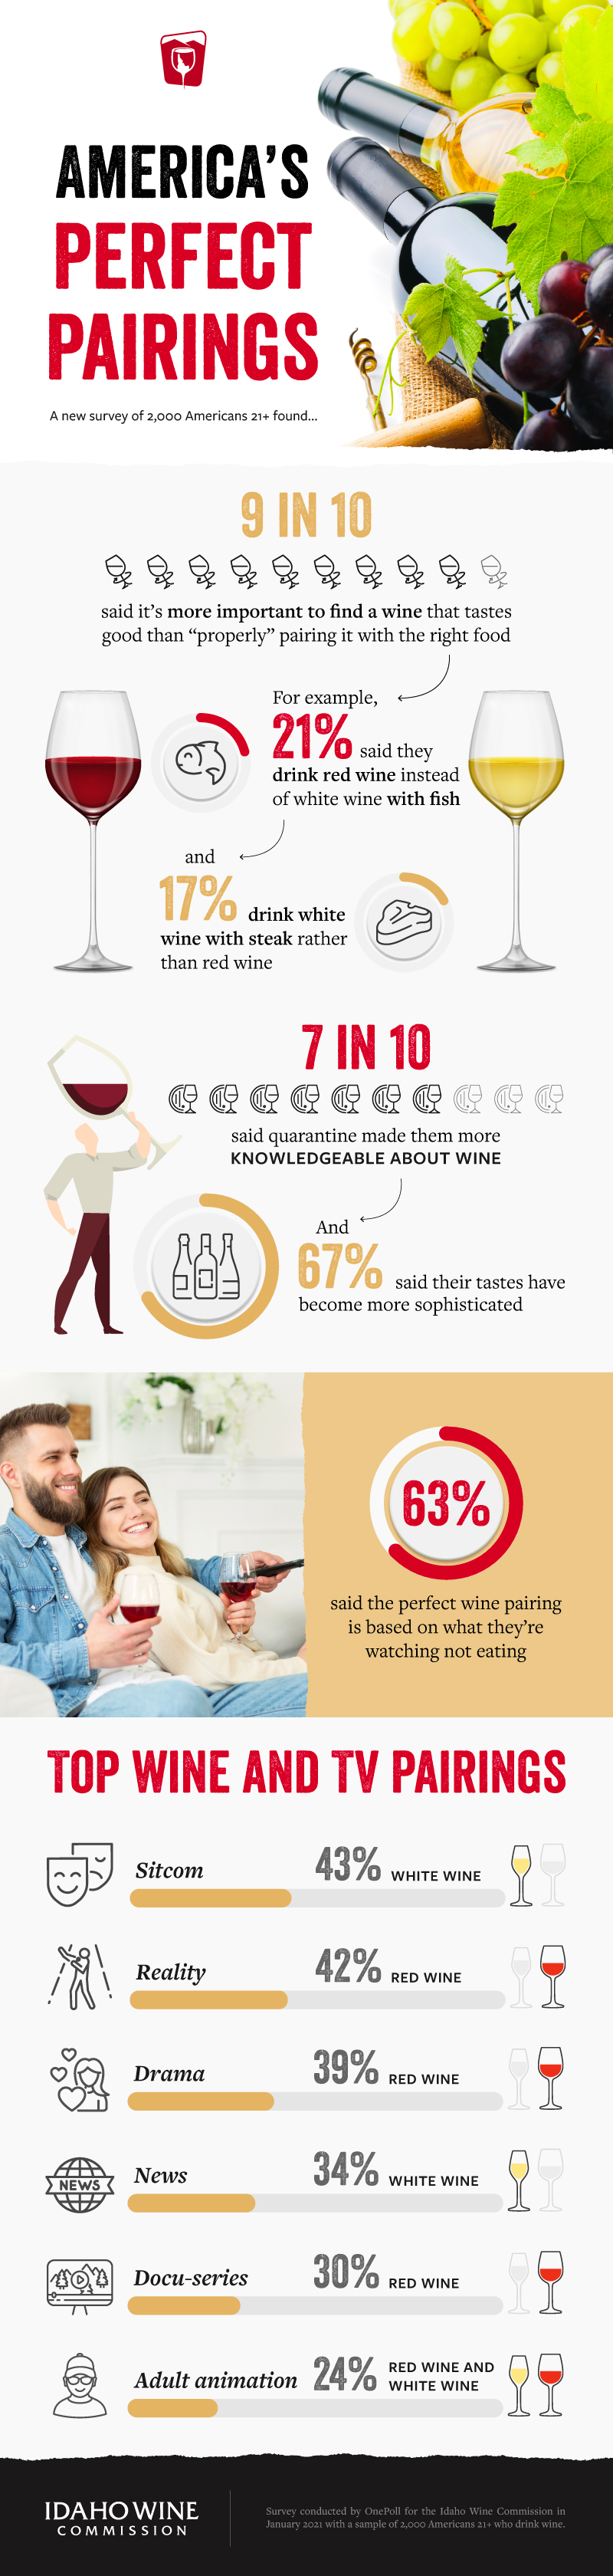 Wine pairing results